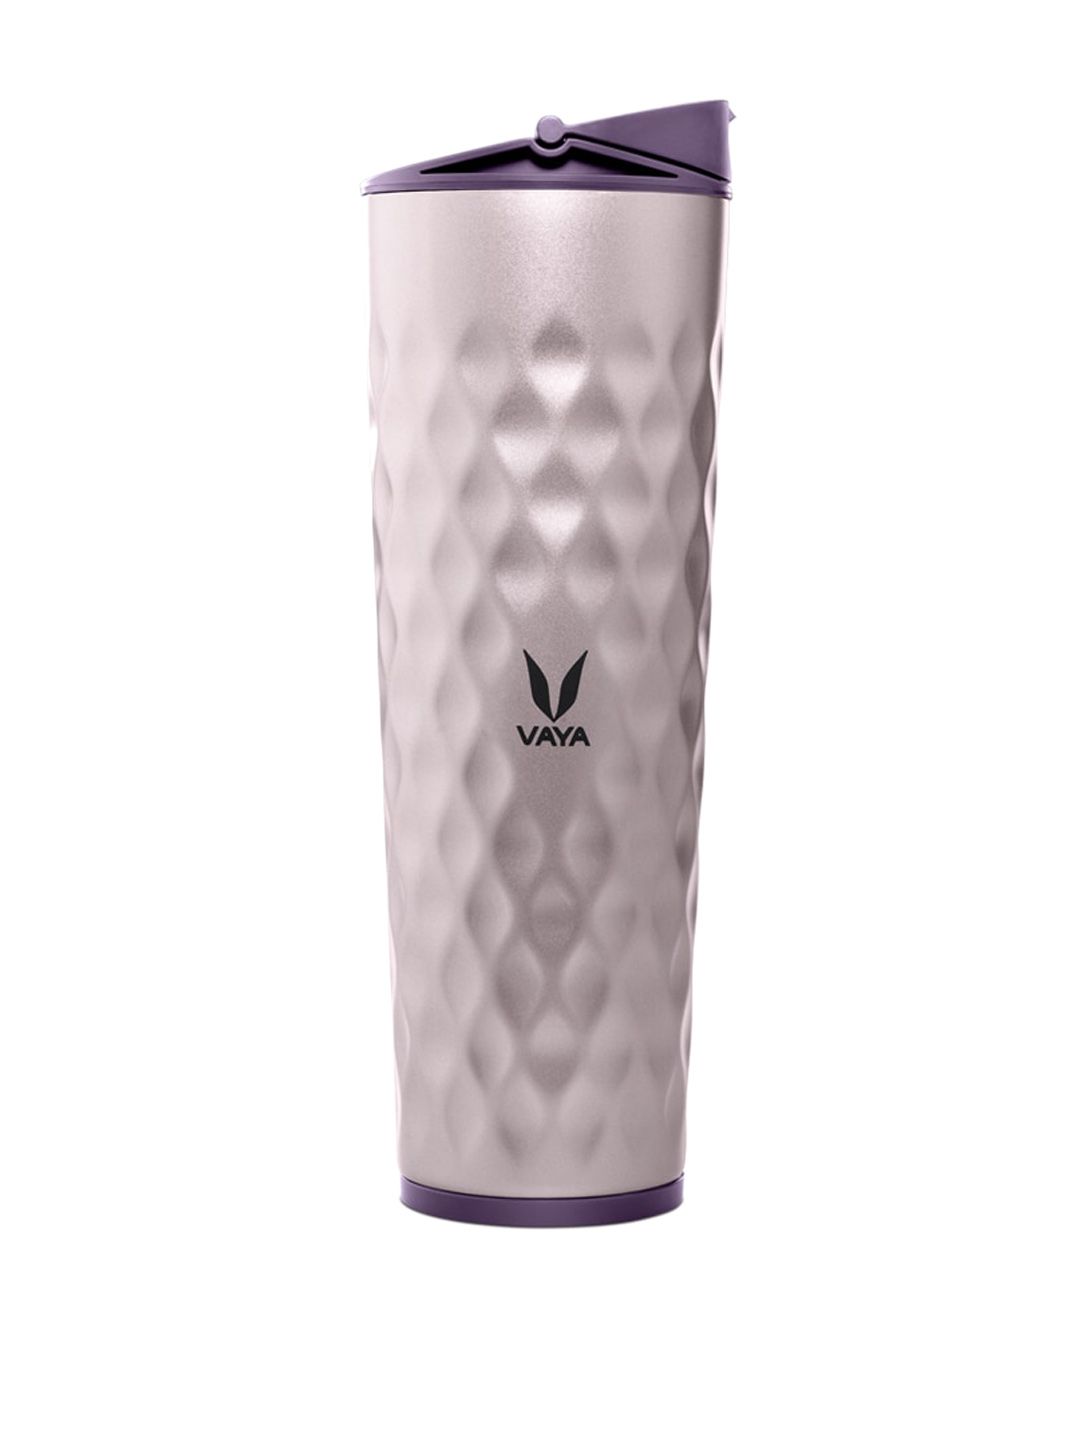 Vaya Unisex Purple & Silver-Toned Solid Stainless Steel BPA Free Water Bottle With Sipper 600 Ml Price in India